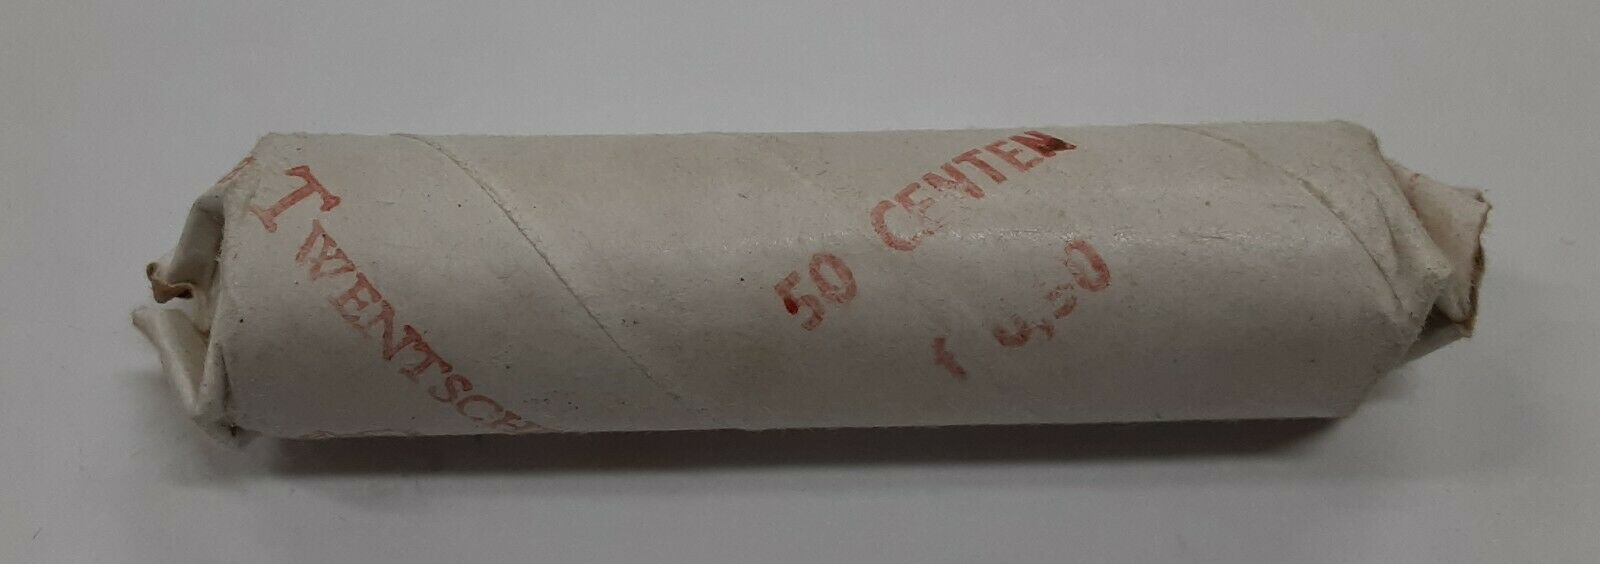 1962 Netherlands Roll - 50 BU 1 Cent Coins in Dutch Bank Wrapper - See Photos